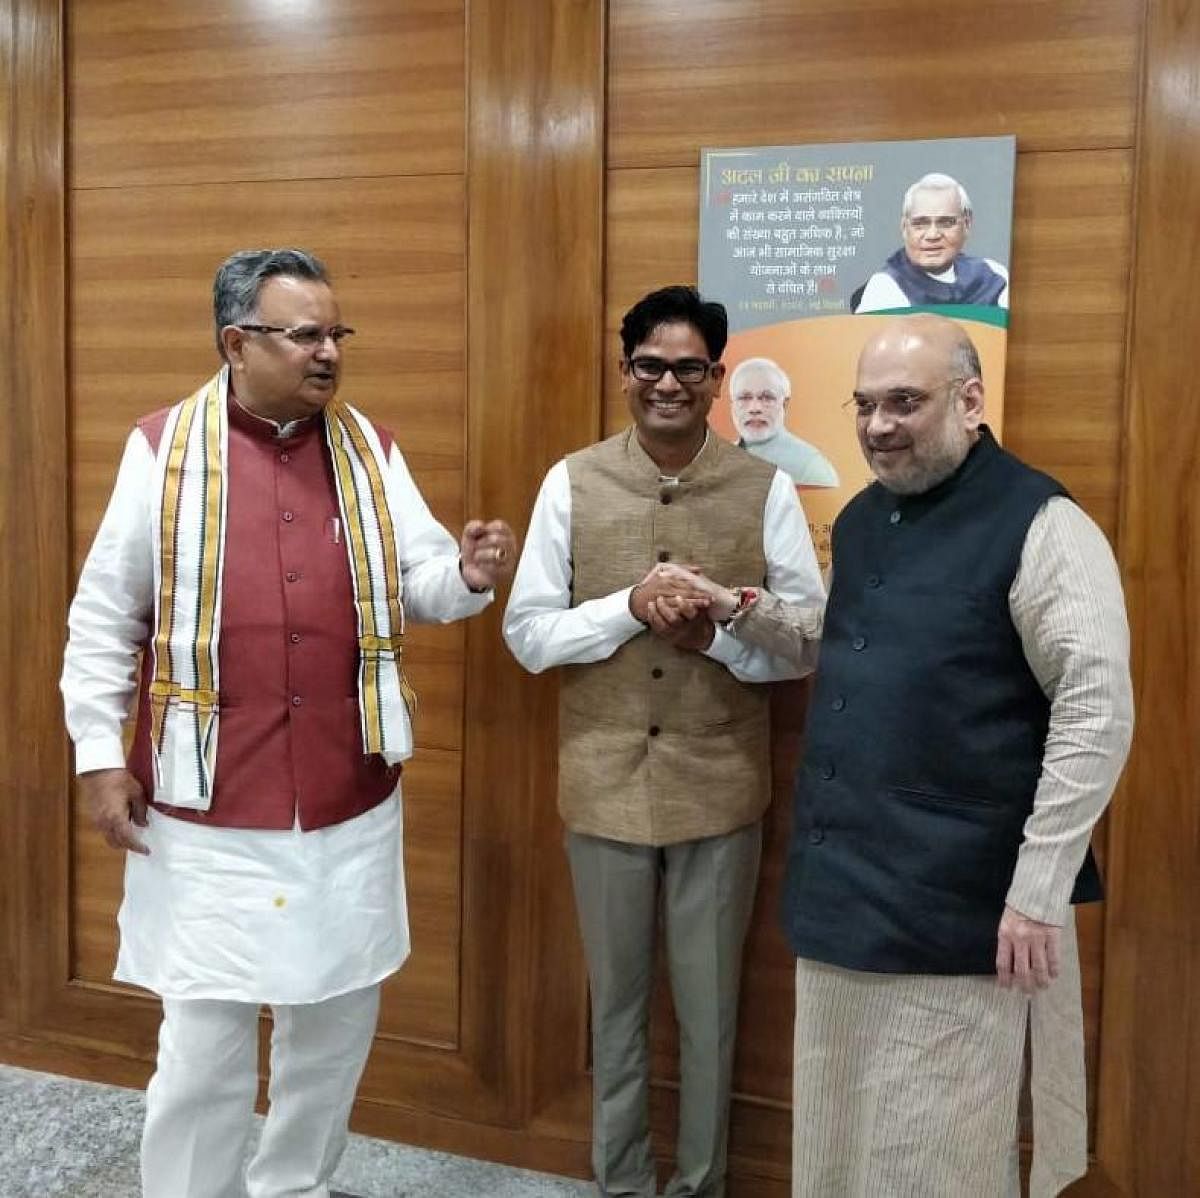 The photo tweeted by O P Choudhary, of him with BJP chief Amit Shah and Chhattisgarh Chief Minister Raman Singh. Twitter